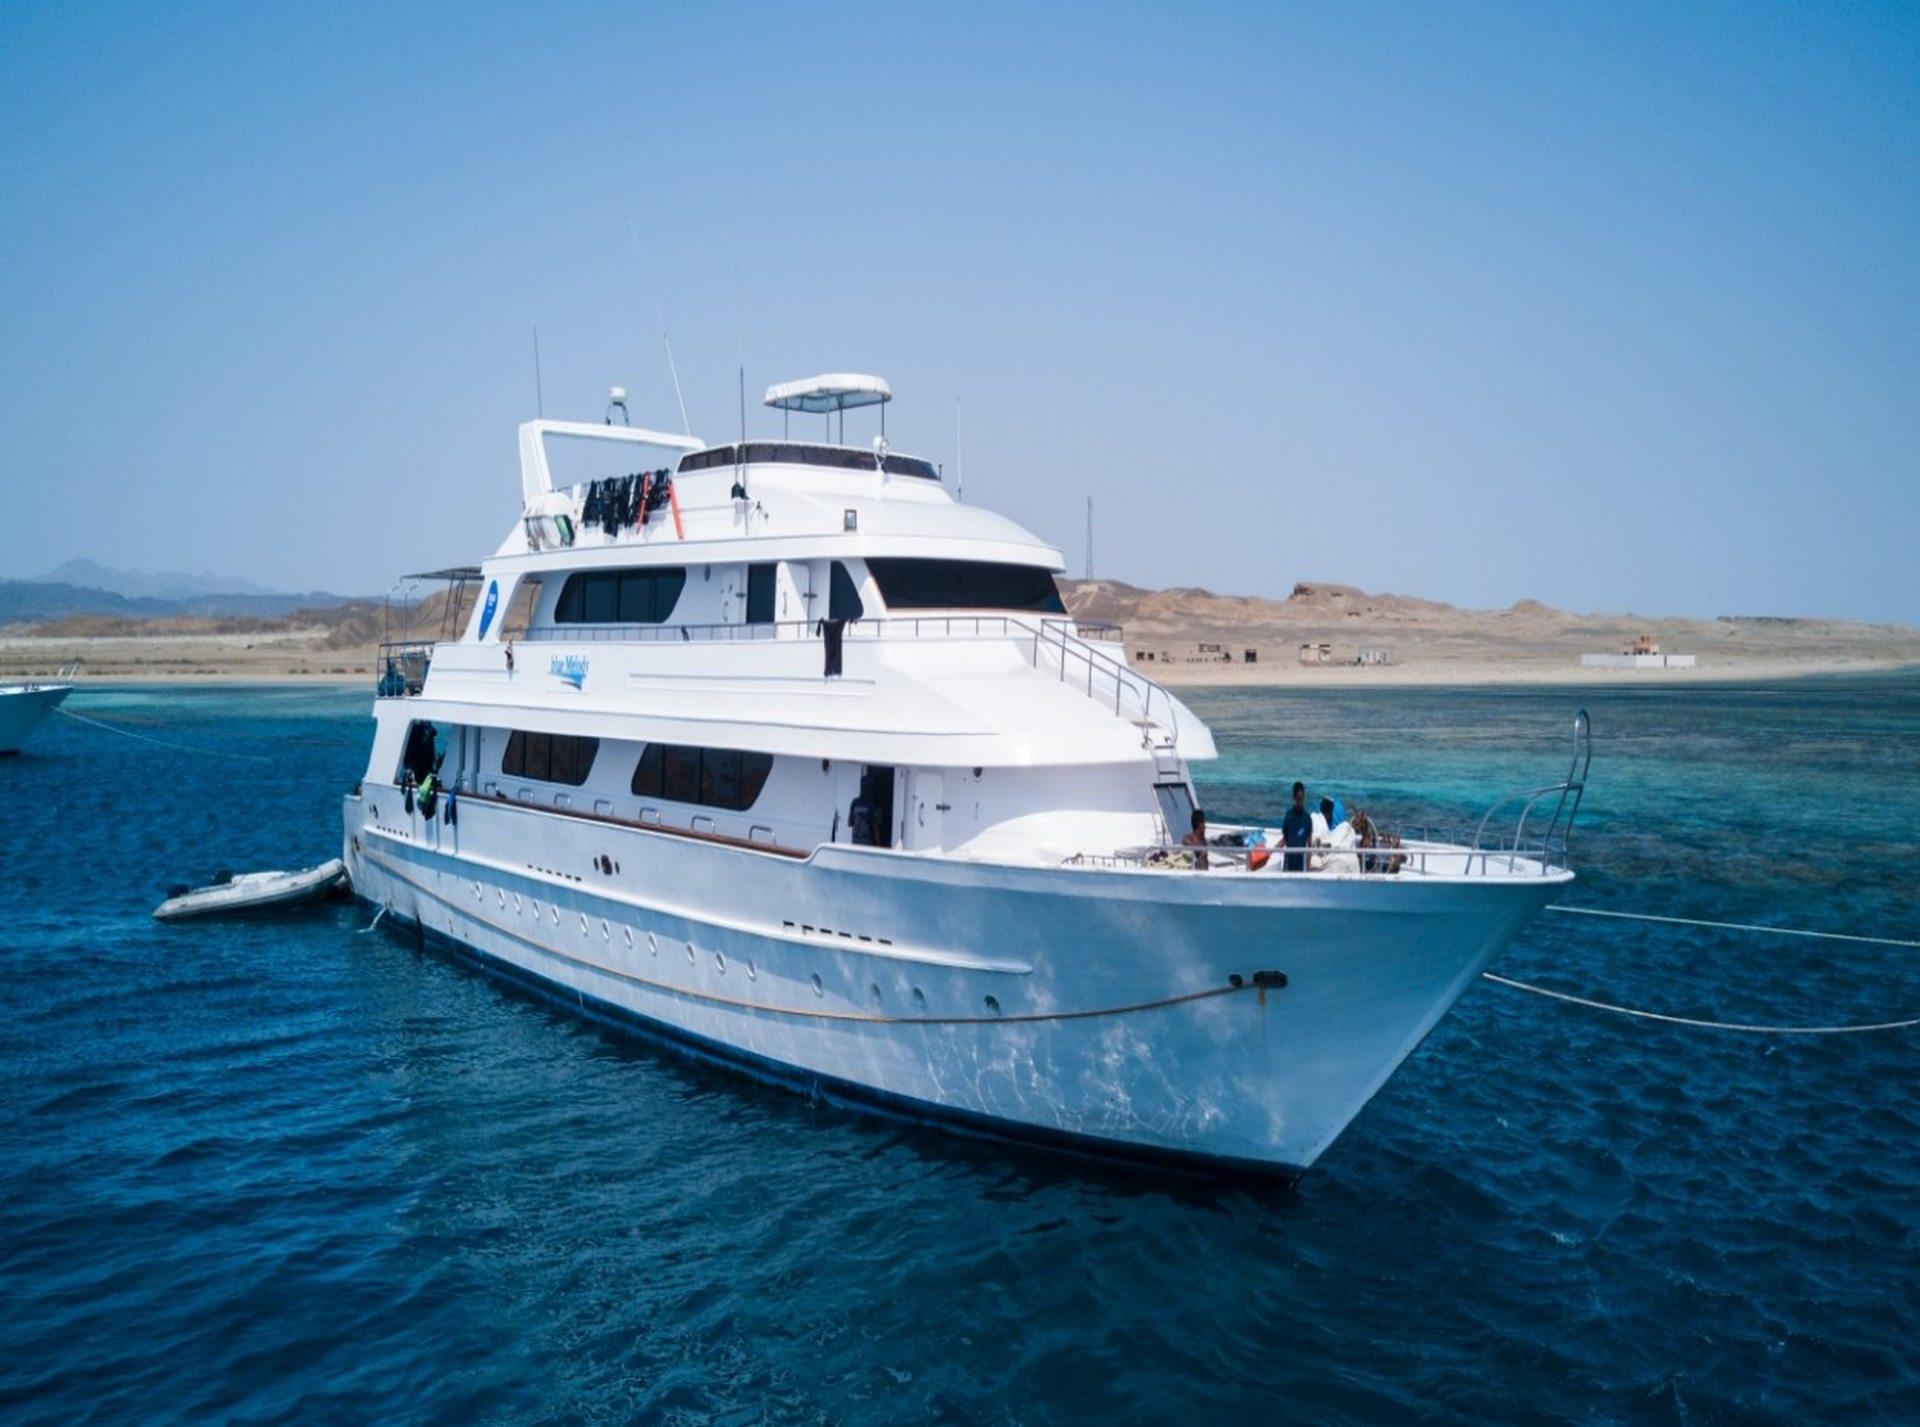 The MY Blue Melody, one of the best liveaboards in Egypt and which has the best Red Sea liveaboard itinerary for shark lovers